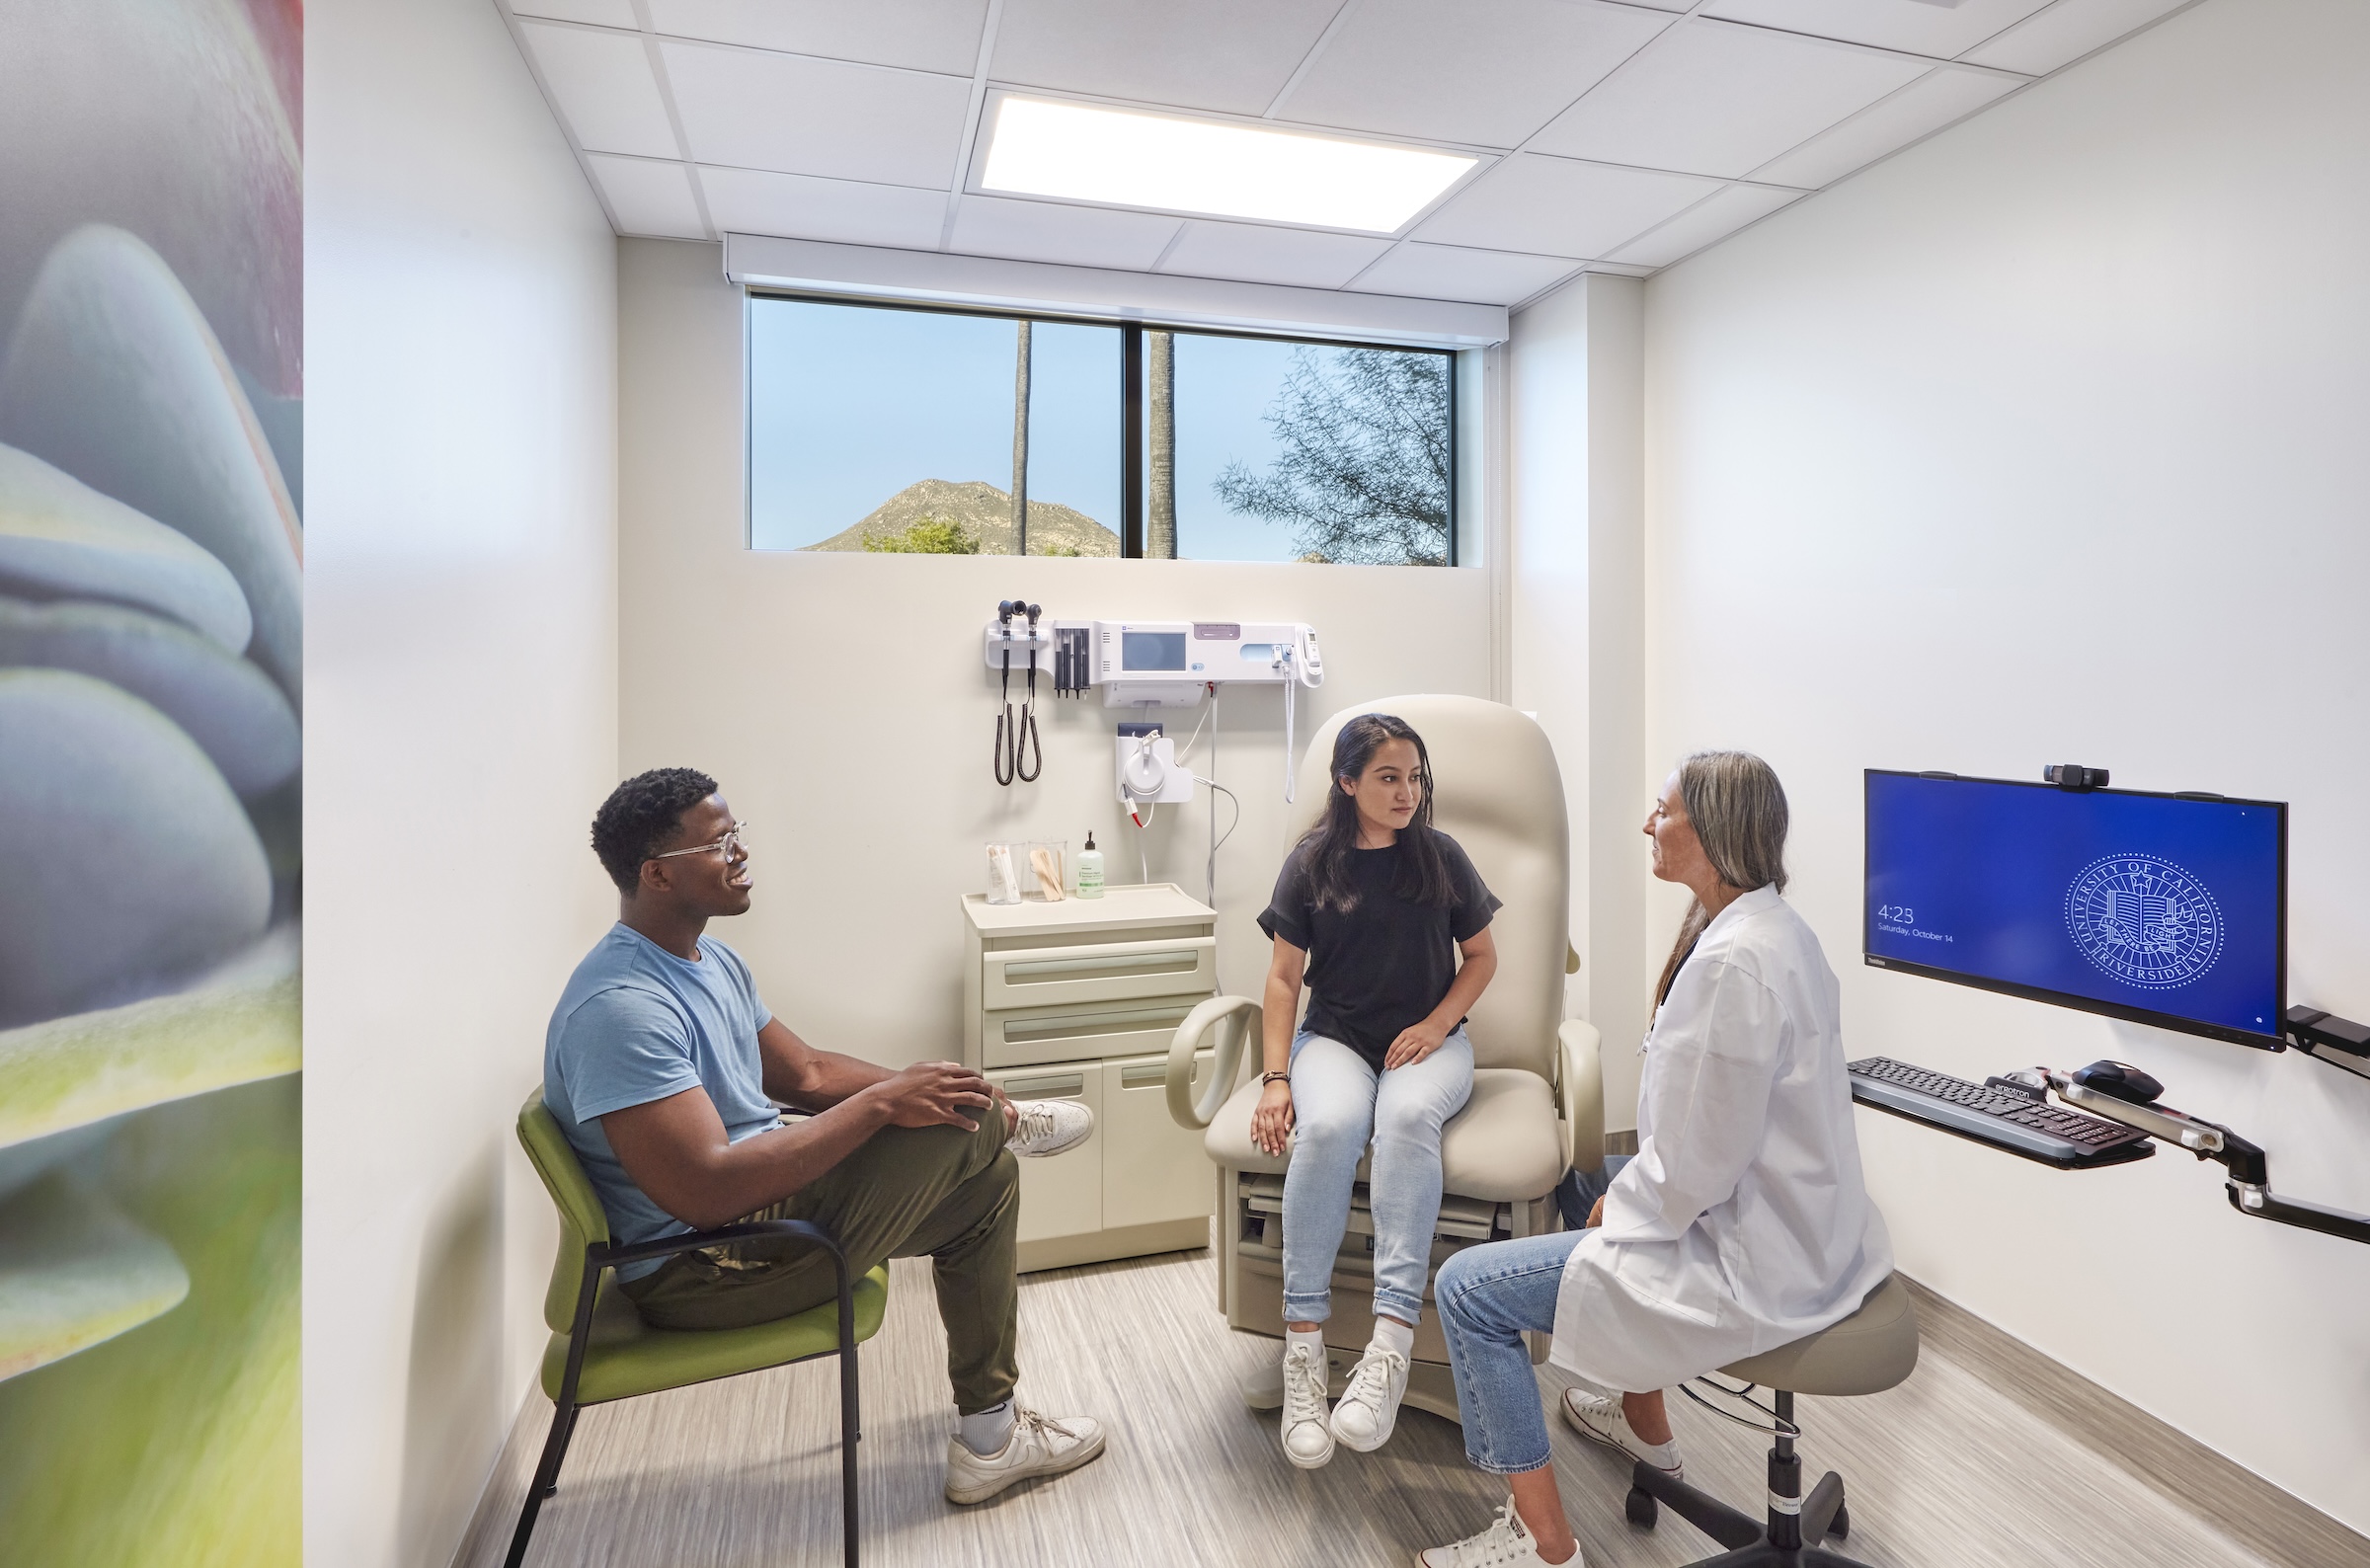 UC Riverside’s Student Health and Counseling Center provides an environment on par with major medical centers Photo courtesy HGA